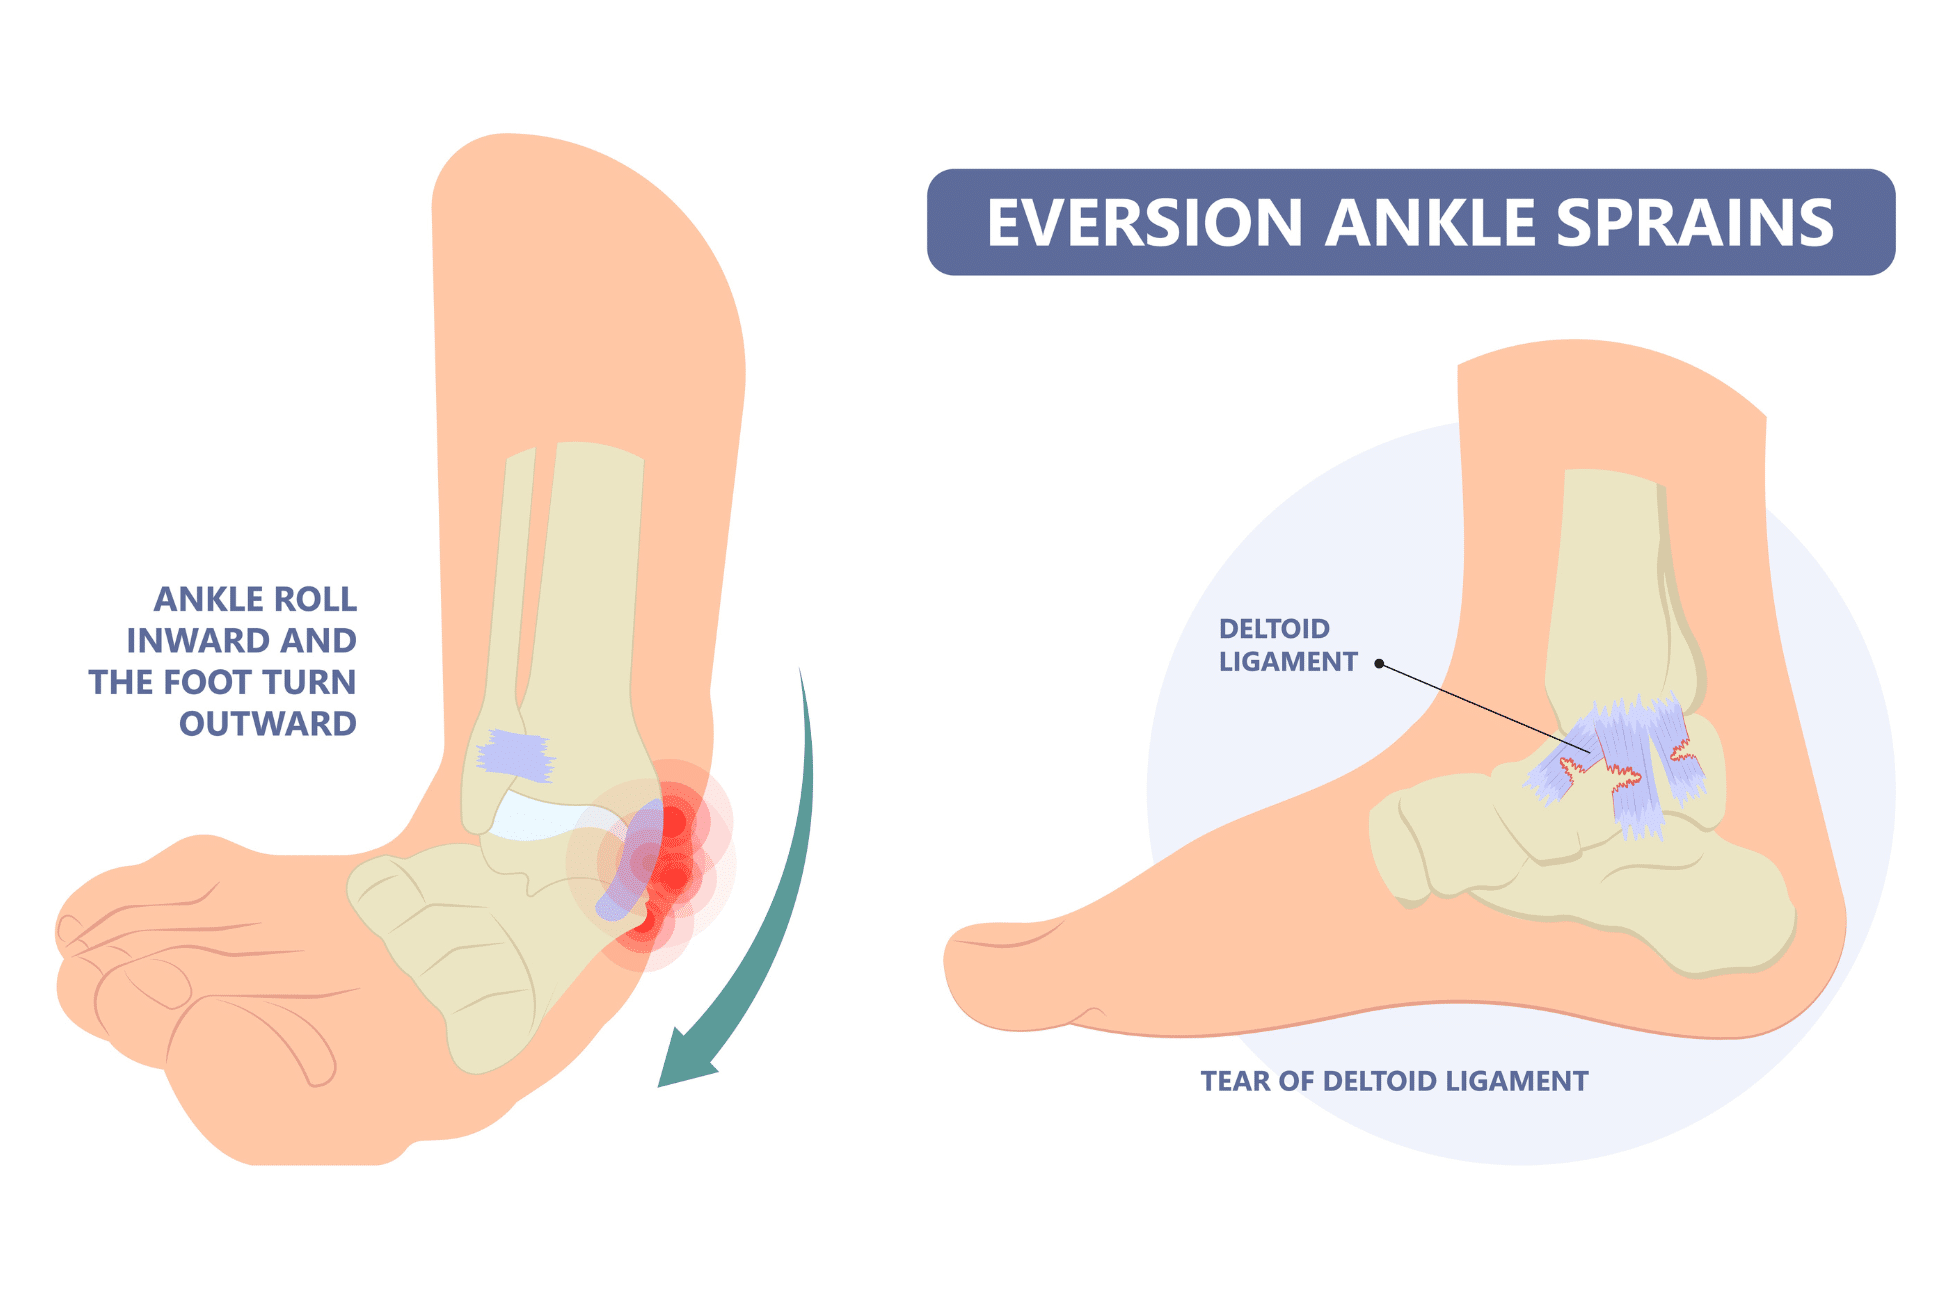 Sprained ankle healing time diagram, demonstrating the anatomy of an eversion ankle sprain by identifying the deltoid ligament and showing the inward rolling motion of this type of sprain.